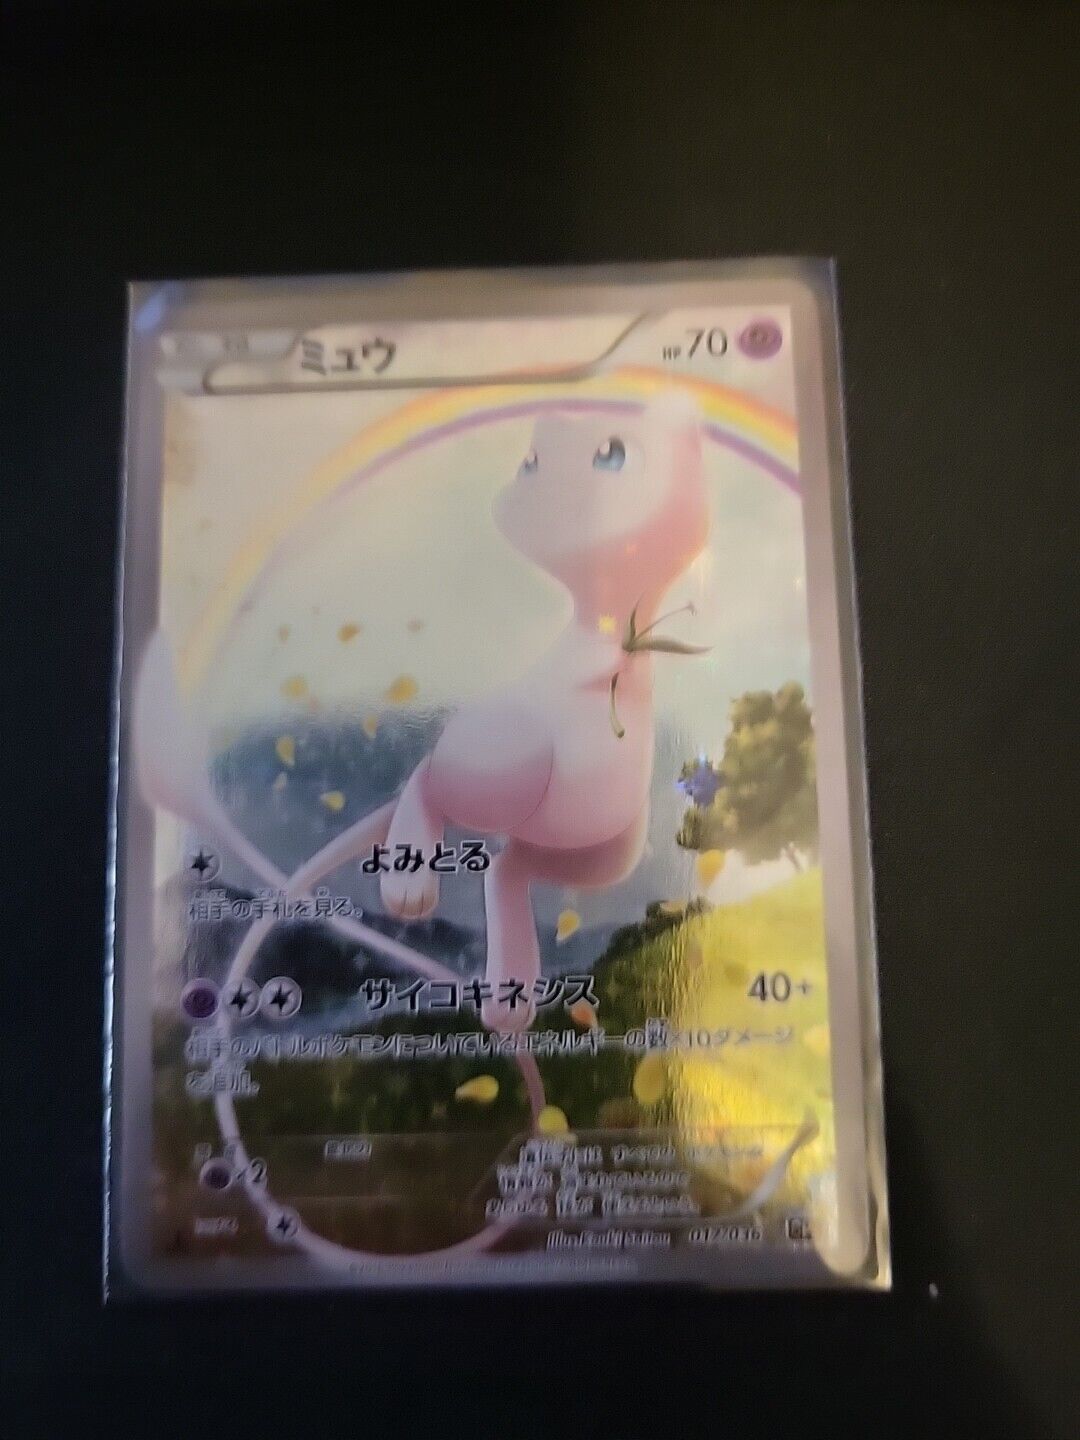 Mew 017/036 CP5 Dream Shine Collection Promo 1st Pokemon Card | Japanese | NM